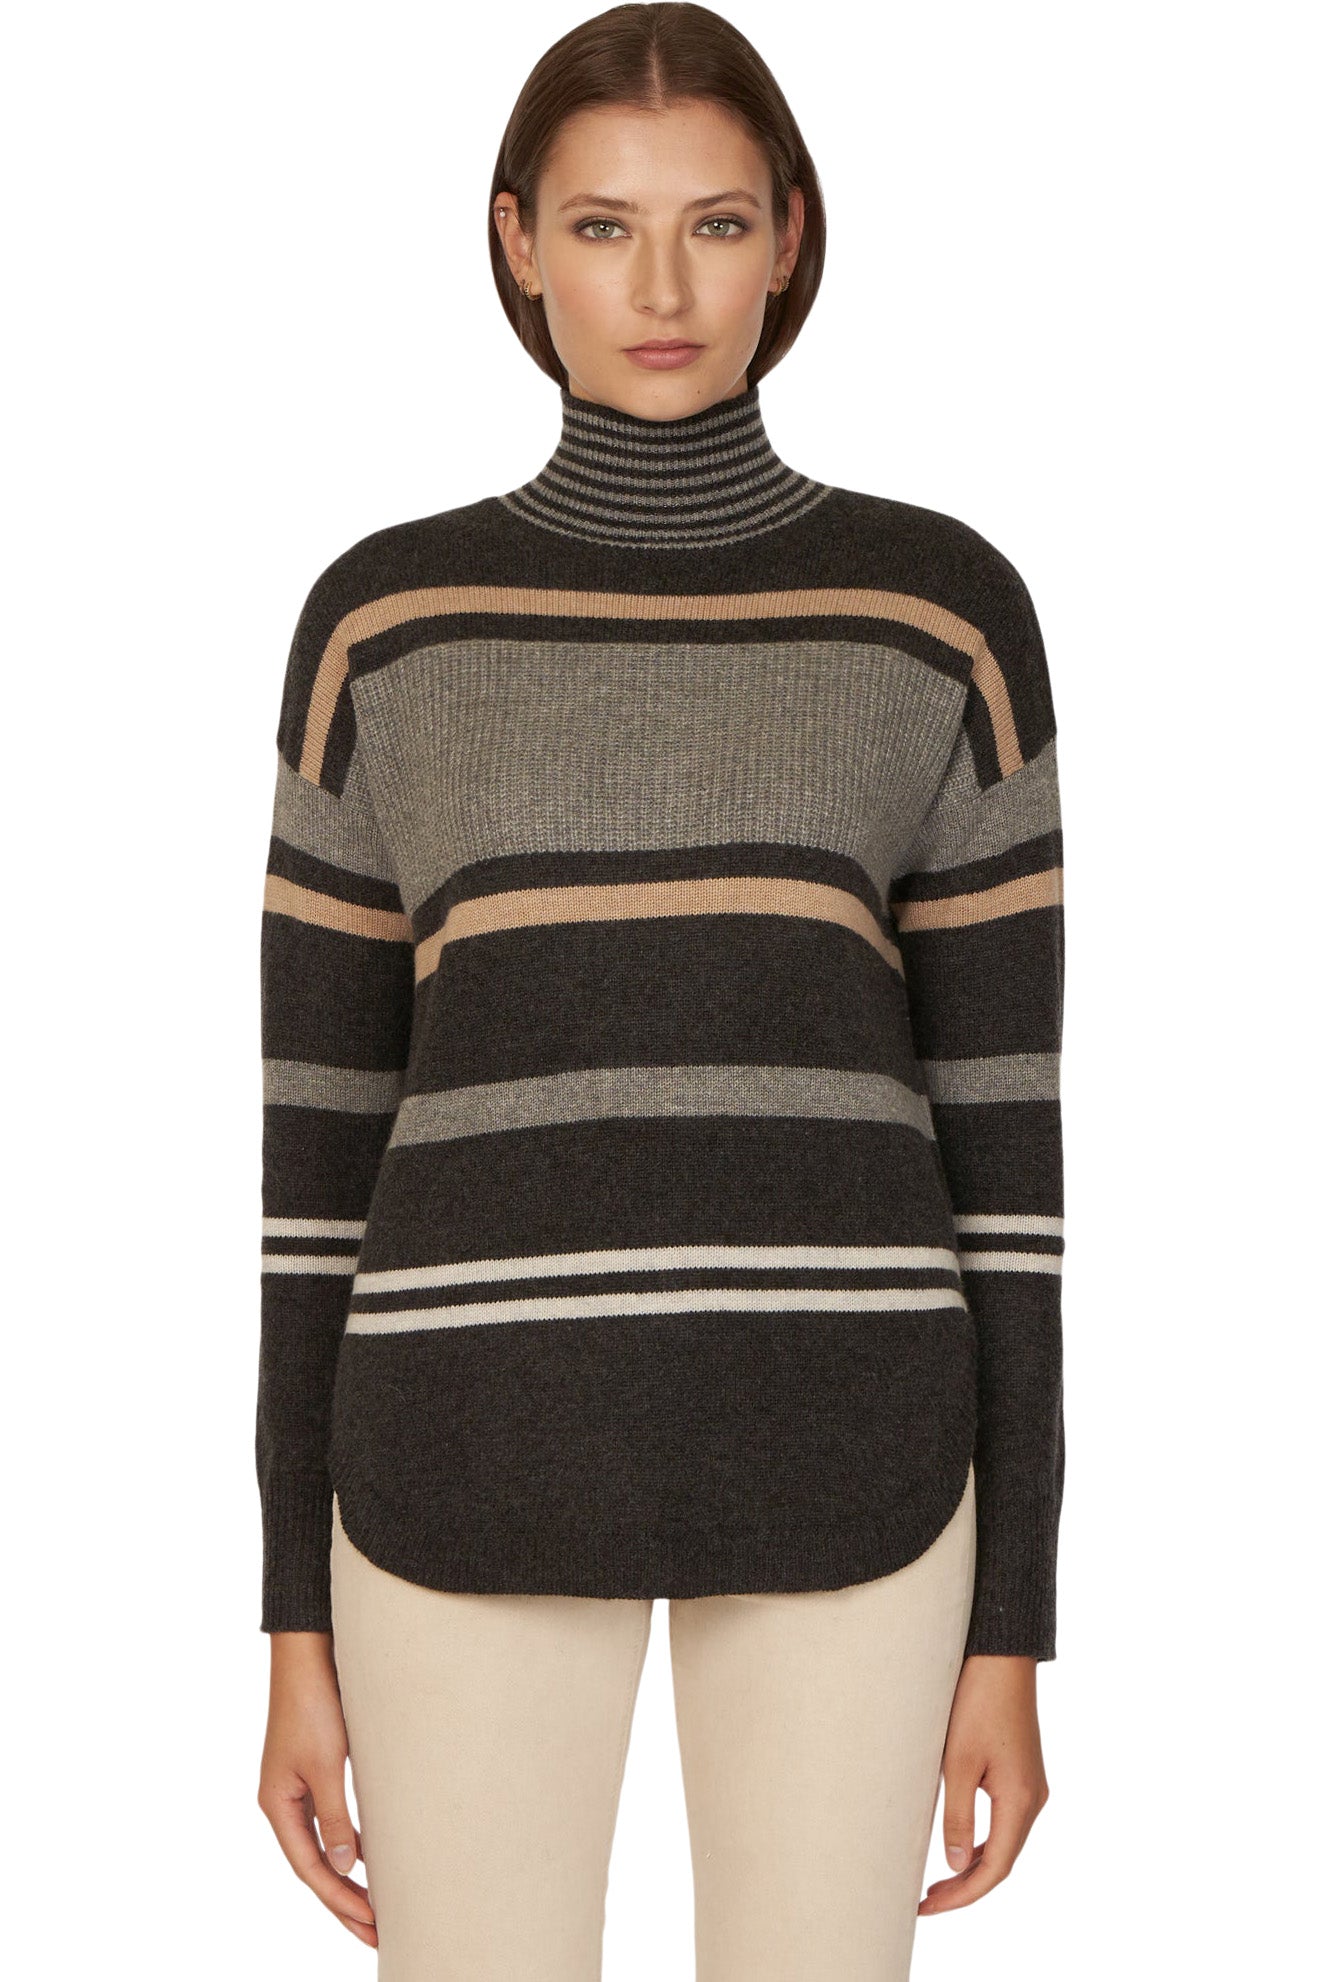 Autumn Cashmere Striped Mock w/ Shirttail in Pepper Combo